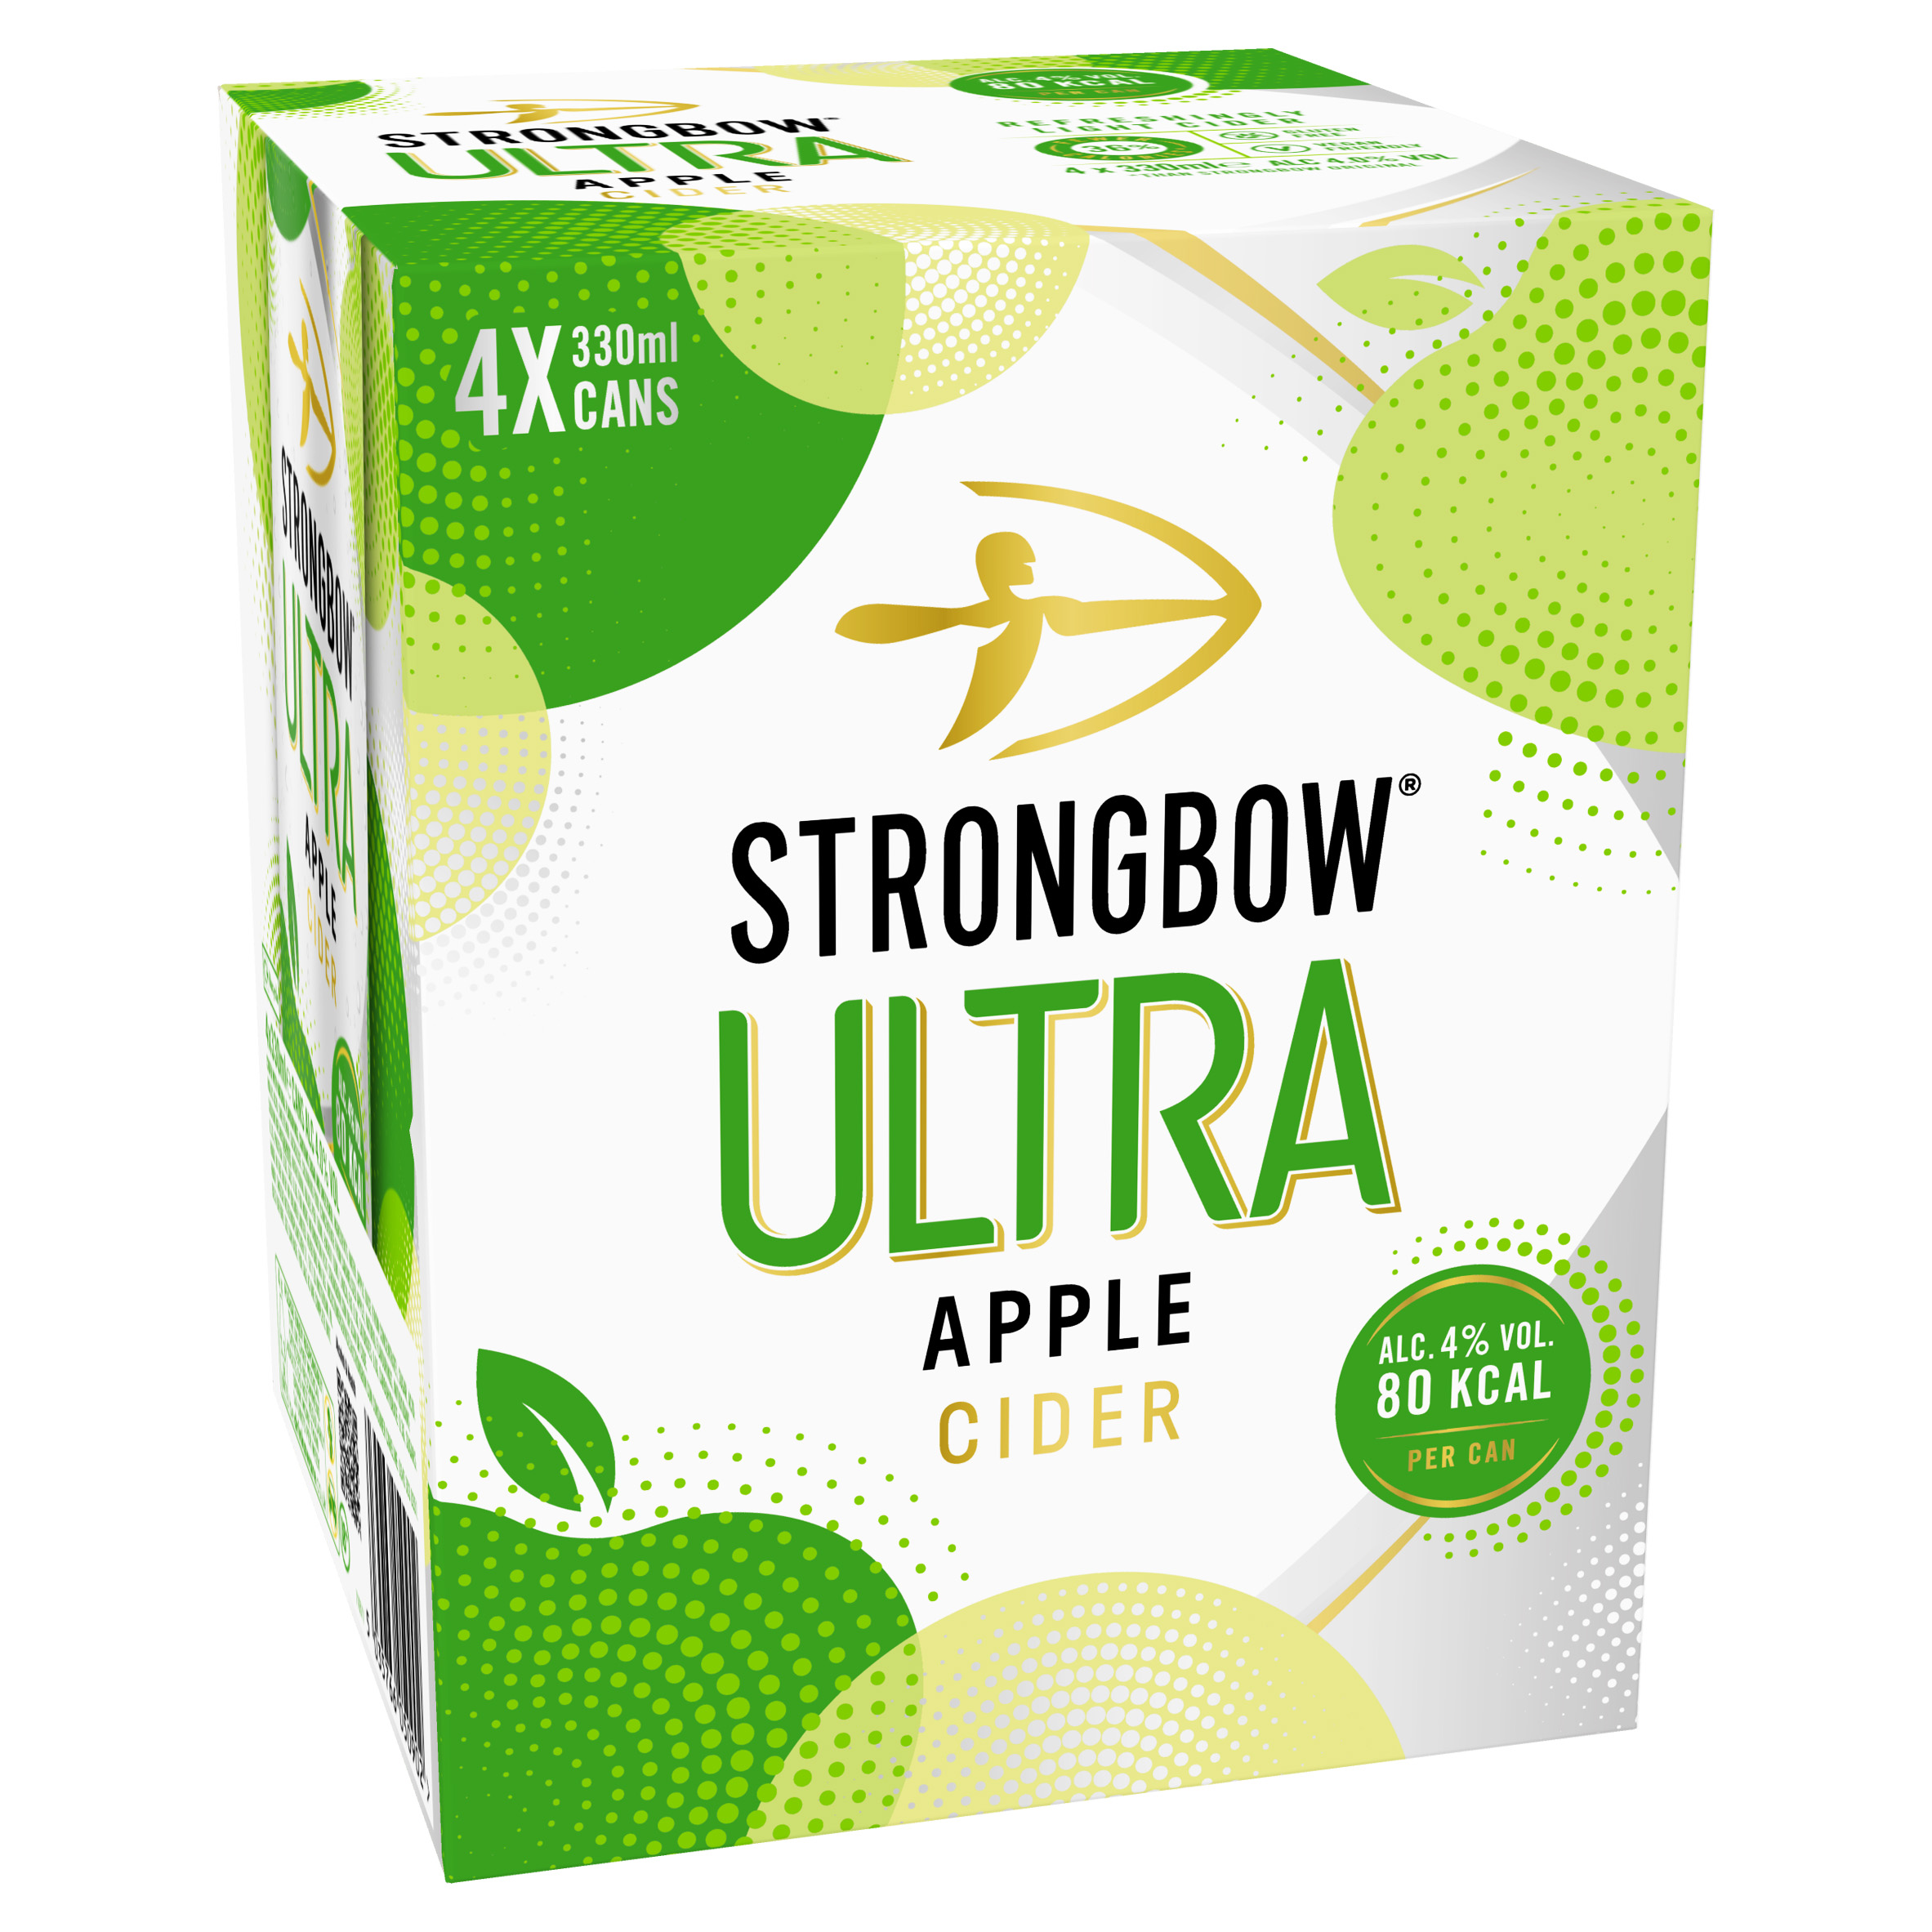 Strongbow Ultra announces addition to range with new apple flavour